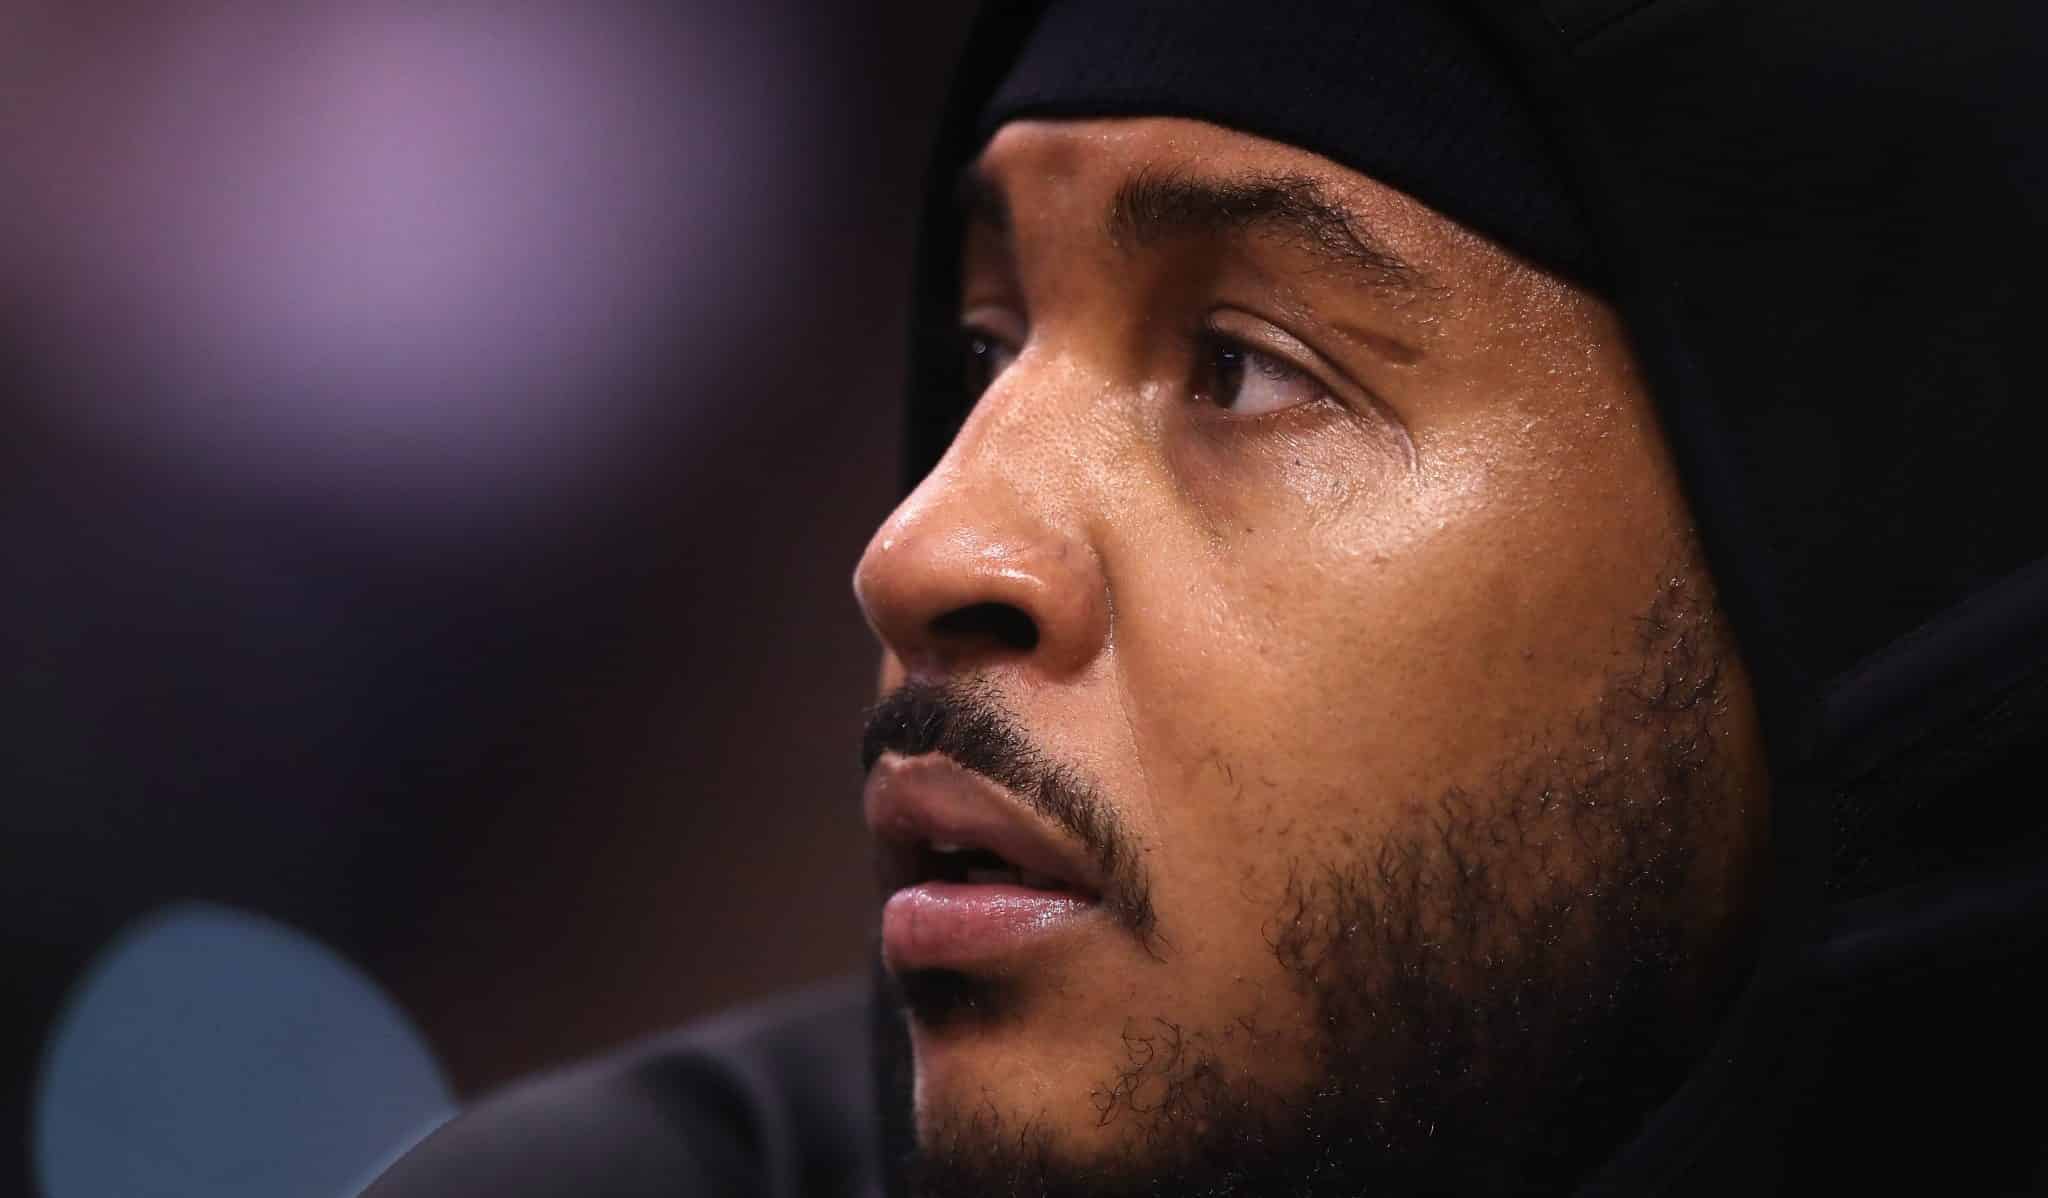 PHOENIX, ARIZONA - DECEMBER 16: Carmelo Anthony #00 of the Portland Trail Blazers sits on the bench during the first half of the NBA game against the Phoenix Suns at Talking Stick Resort Arena on December 16, 2019 in Phoenix, Arizona.